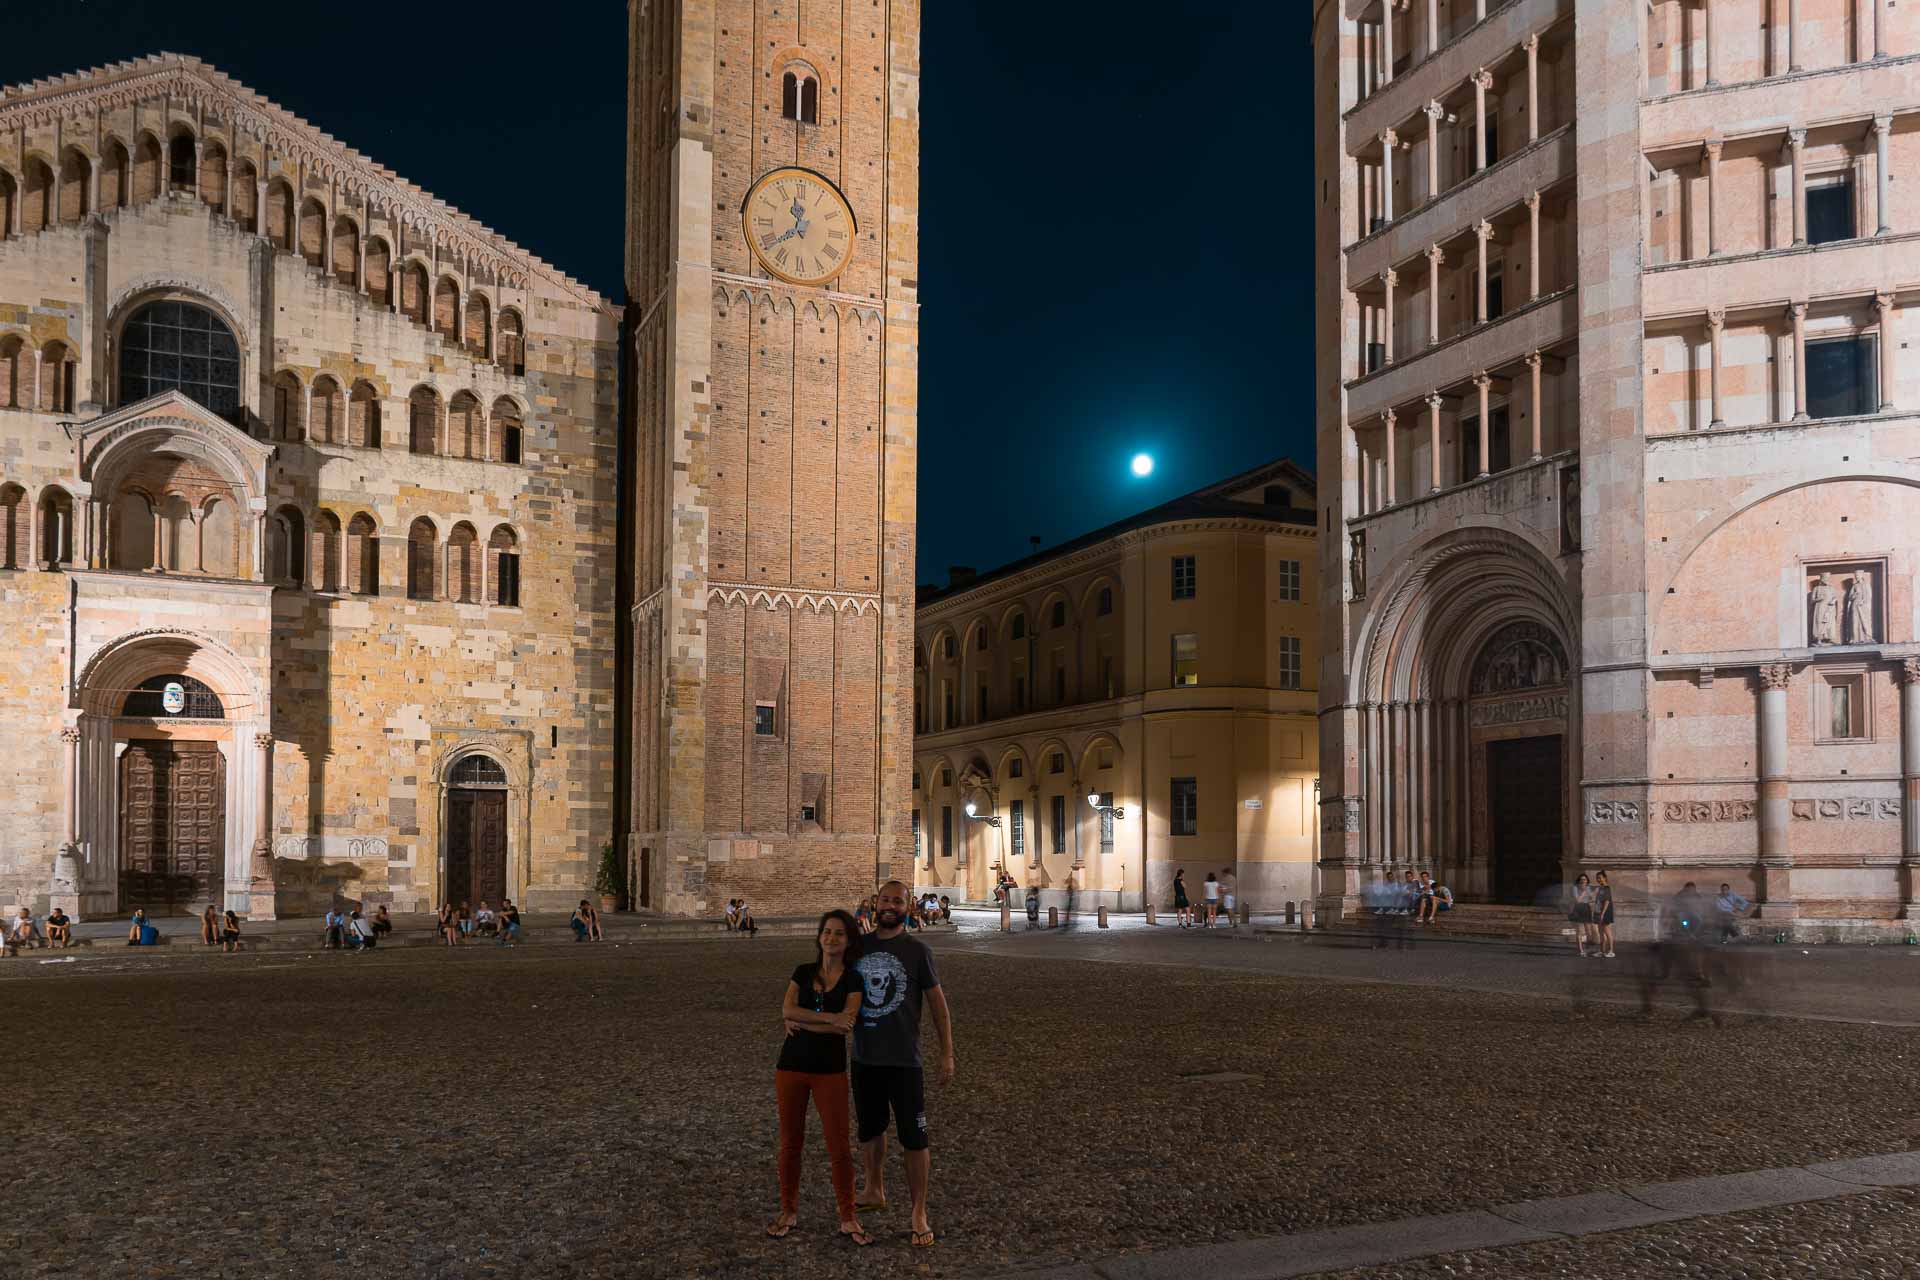 View of the main square of Parma with Tiago and Fernanda in front of the duome of Parma and the battisterio